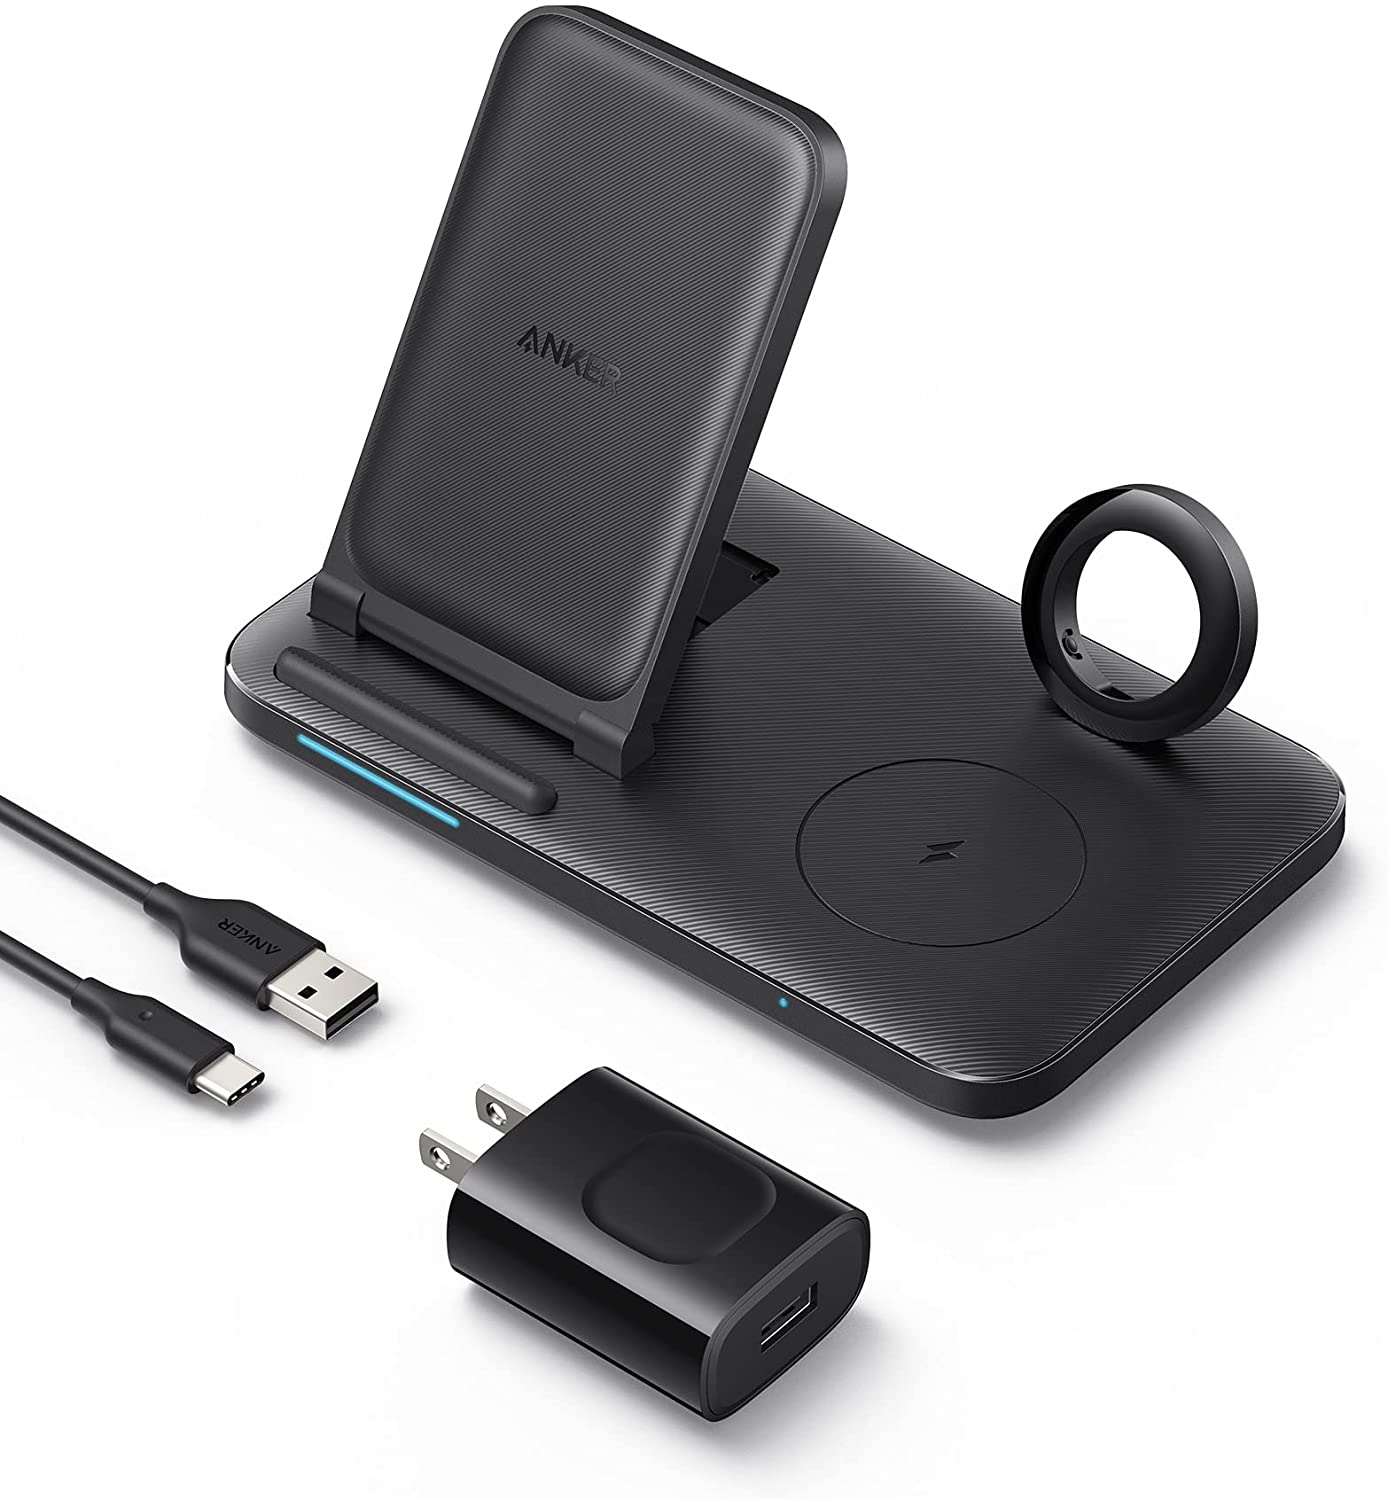 Anker 335 Wireless Charger (3-in-1 Station), The Compact and Convenient Charging Station for $29.99 + FS